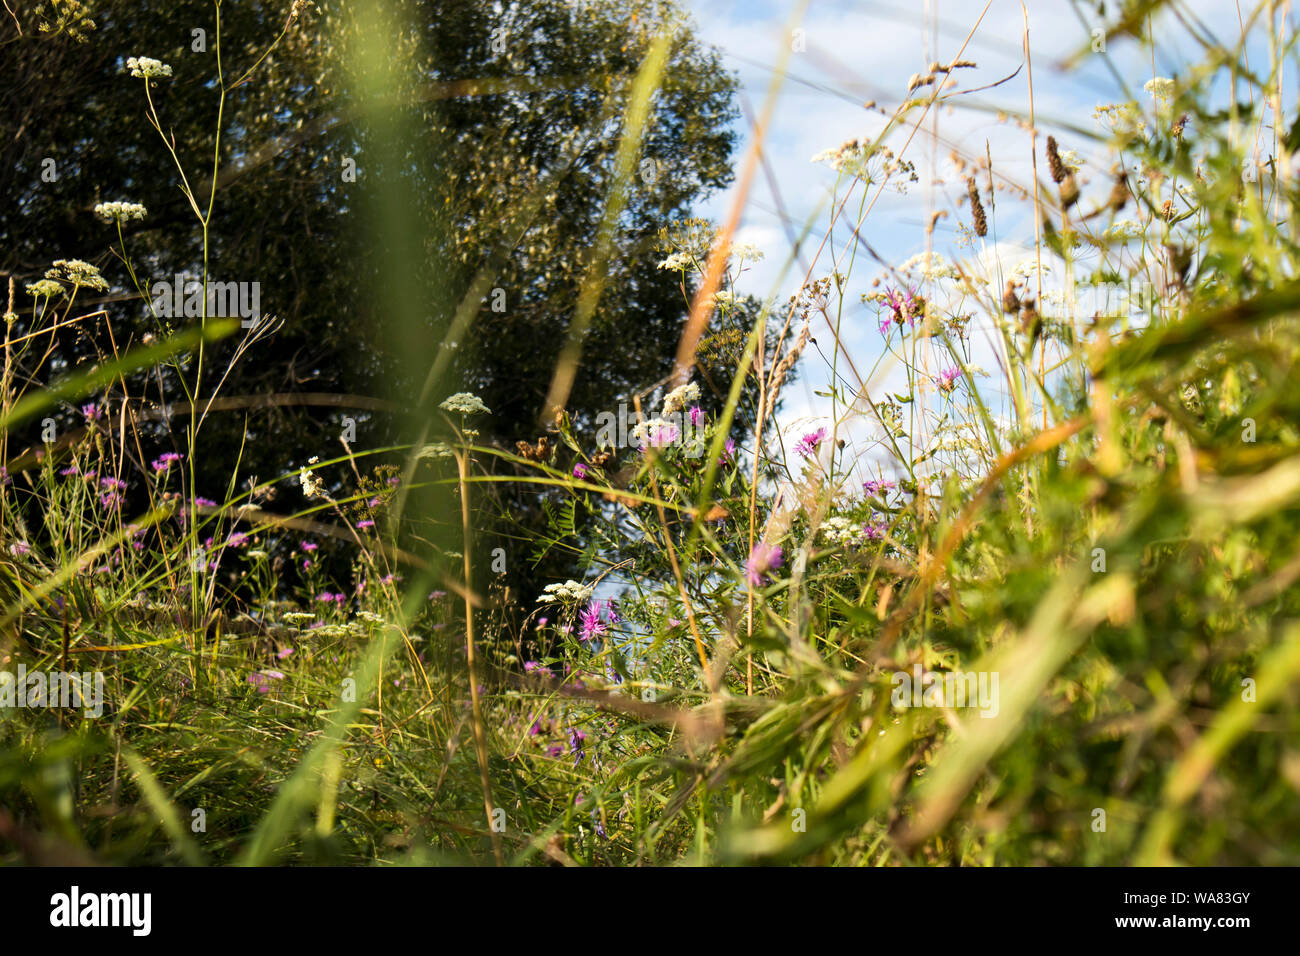 Wild grass meadow in sunny weather Stock Photo